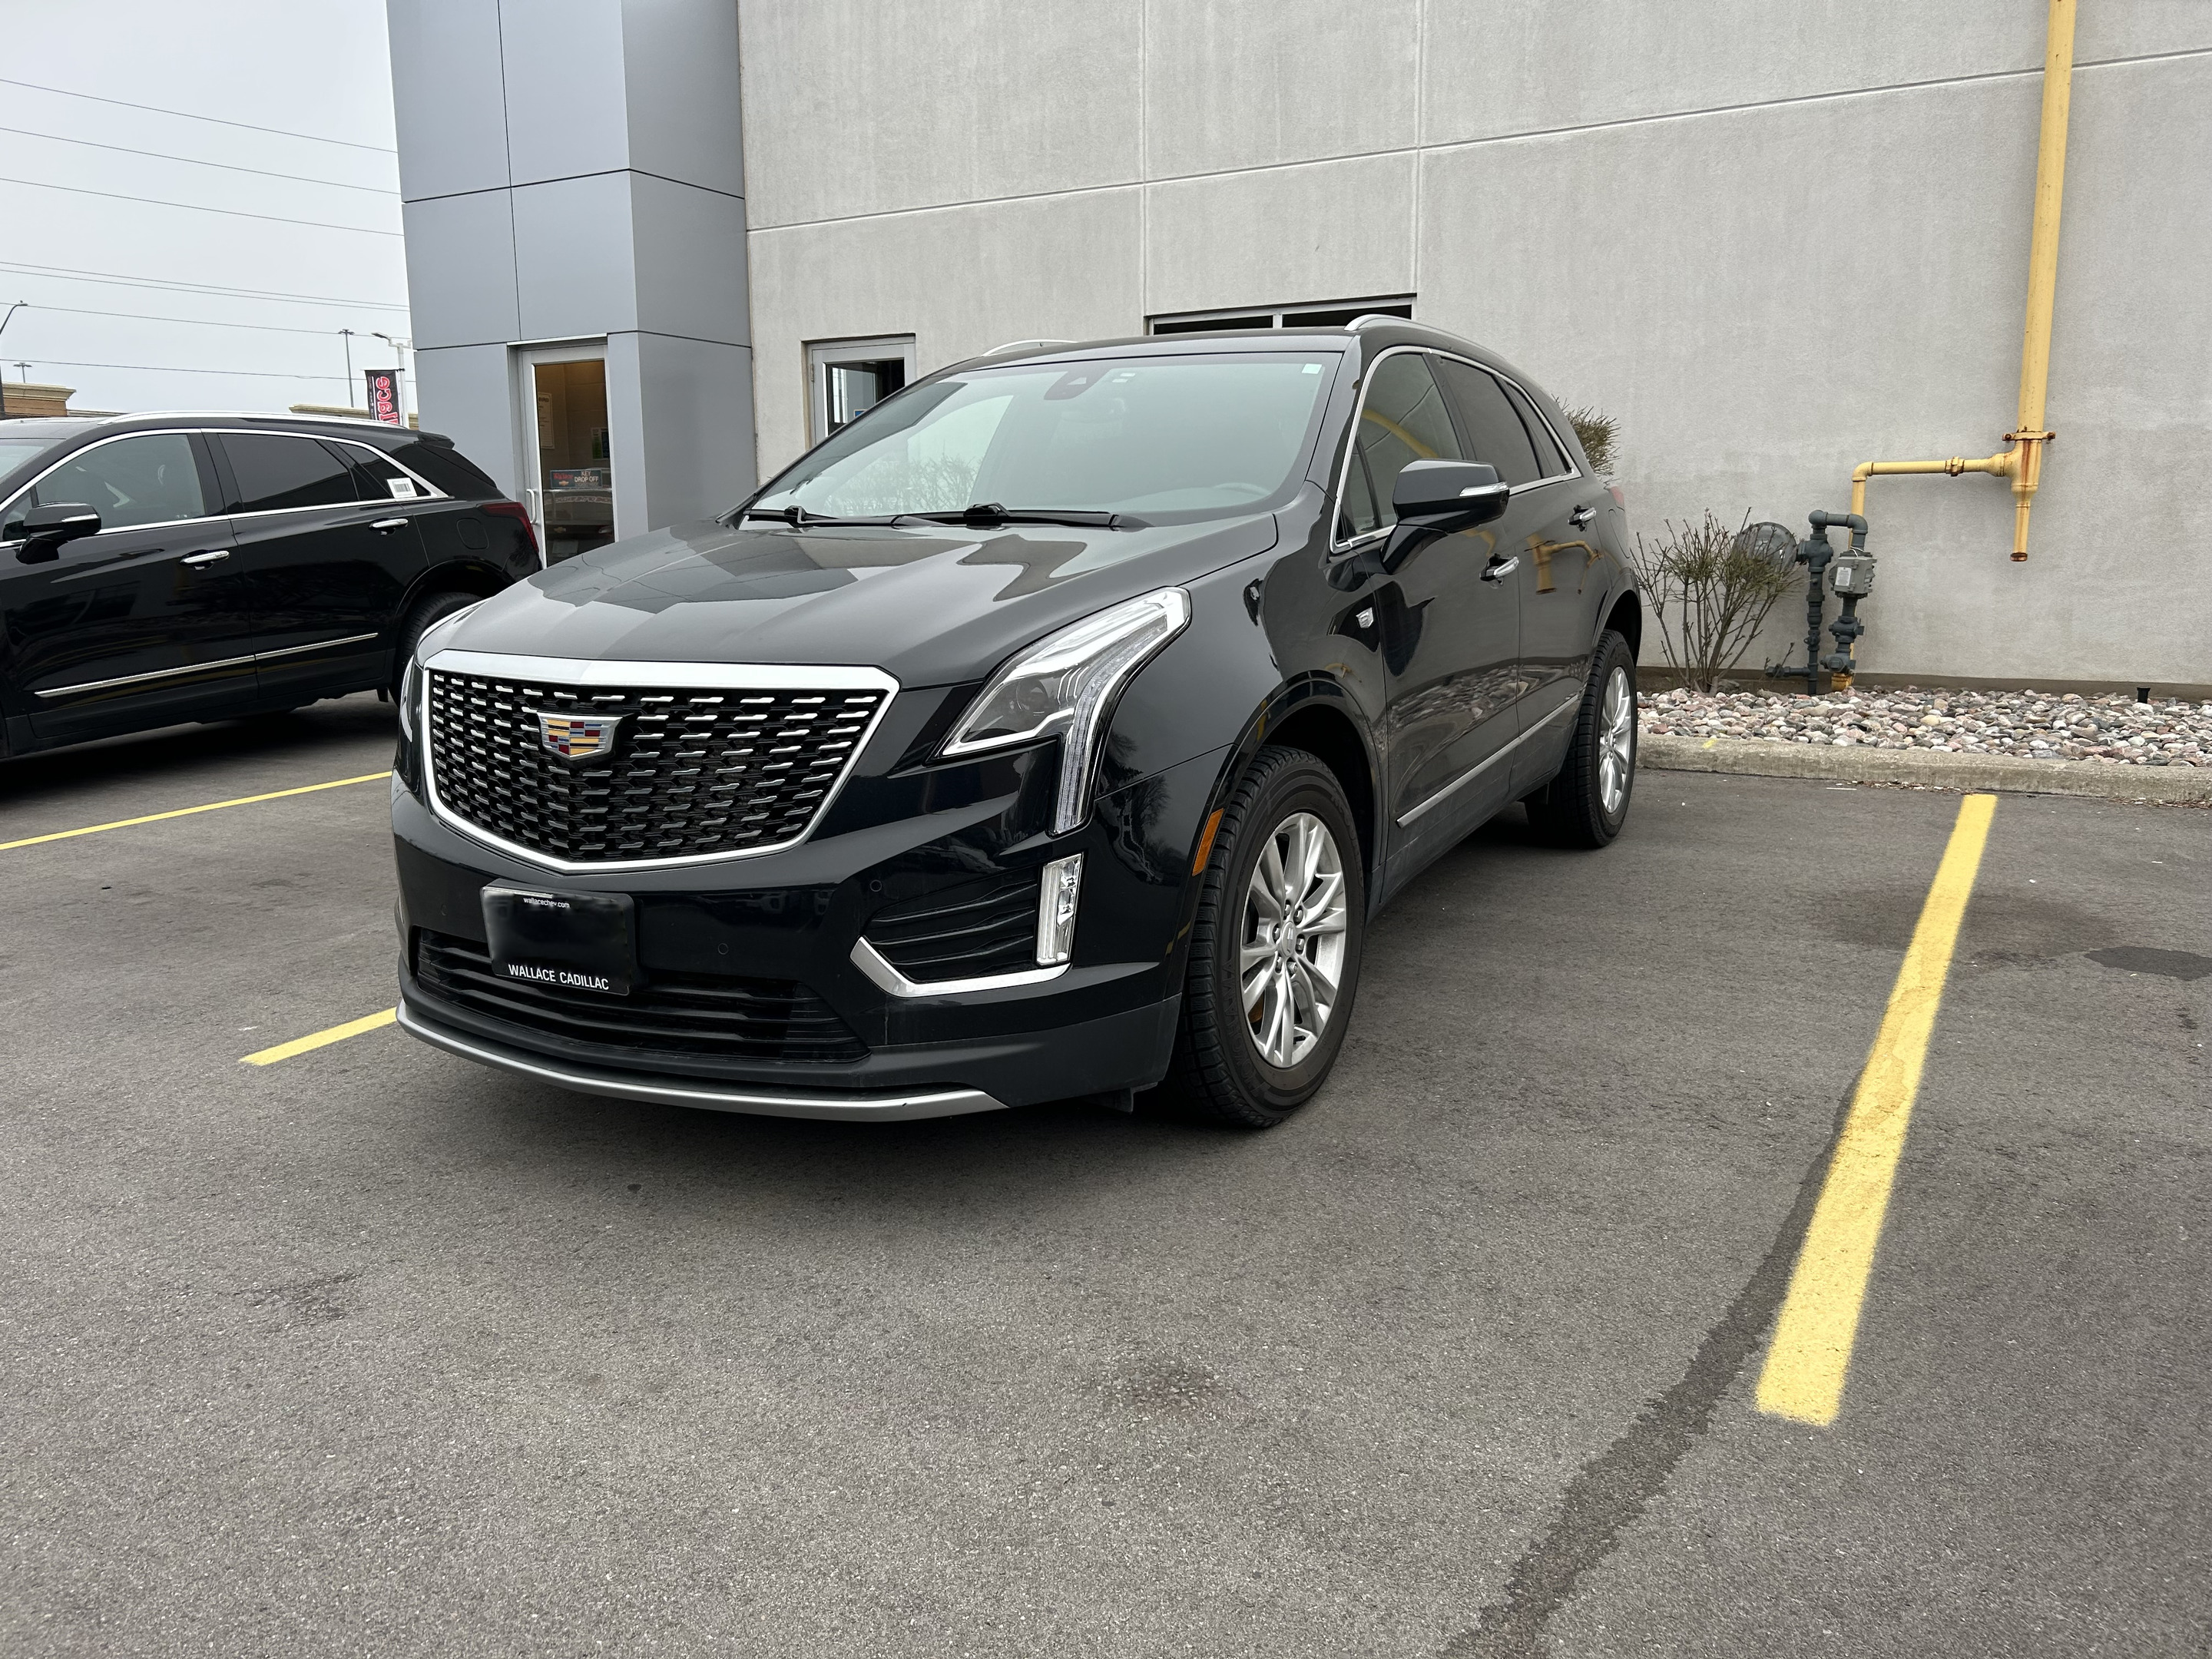 2020 Cadillac XT5 AW Premium Luxury, UltraView Sunroof, Park Assist